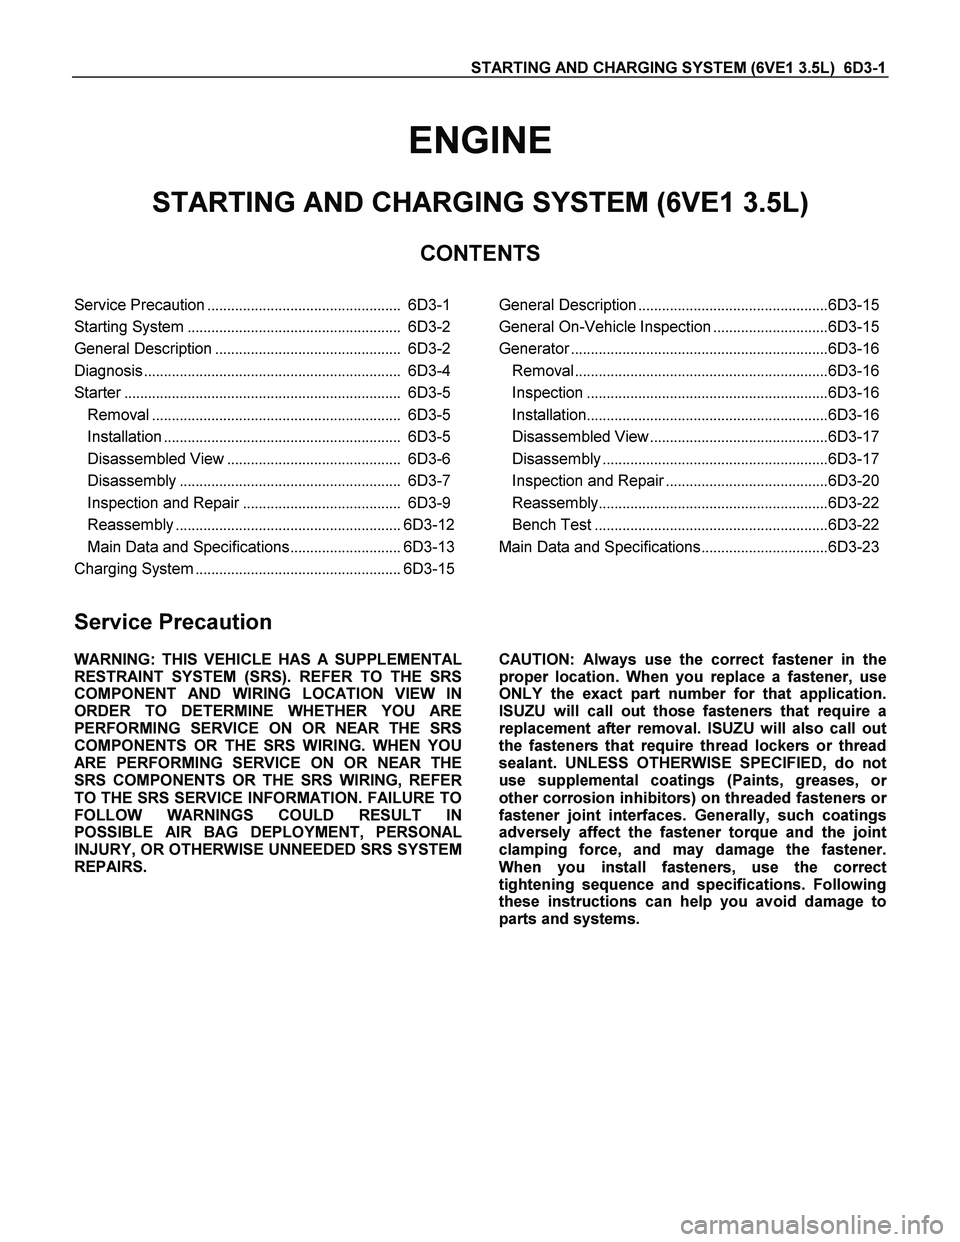 ISUZU TF SERIES 2004  Workshop Manual STARTING AND CHARGING SYSTEM (6VE1 3.5L)  6D3-1 
ENGINE 
STARTING AND CHARGING SYSTEM (6VE1 3.5L) 
CONTENTS 
 
Service Precaution.................................................  6D3-1
Starting Syste